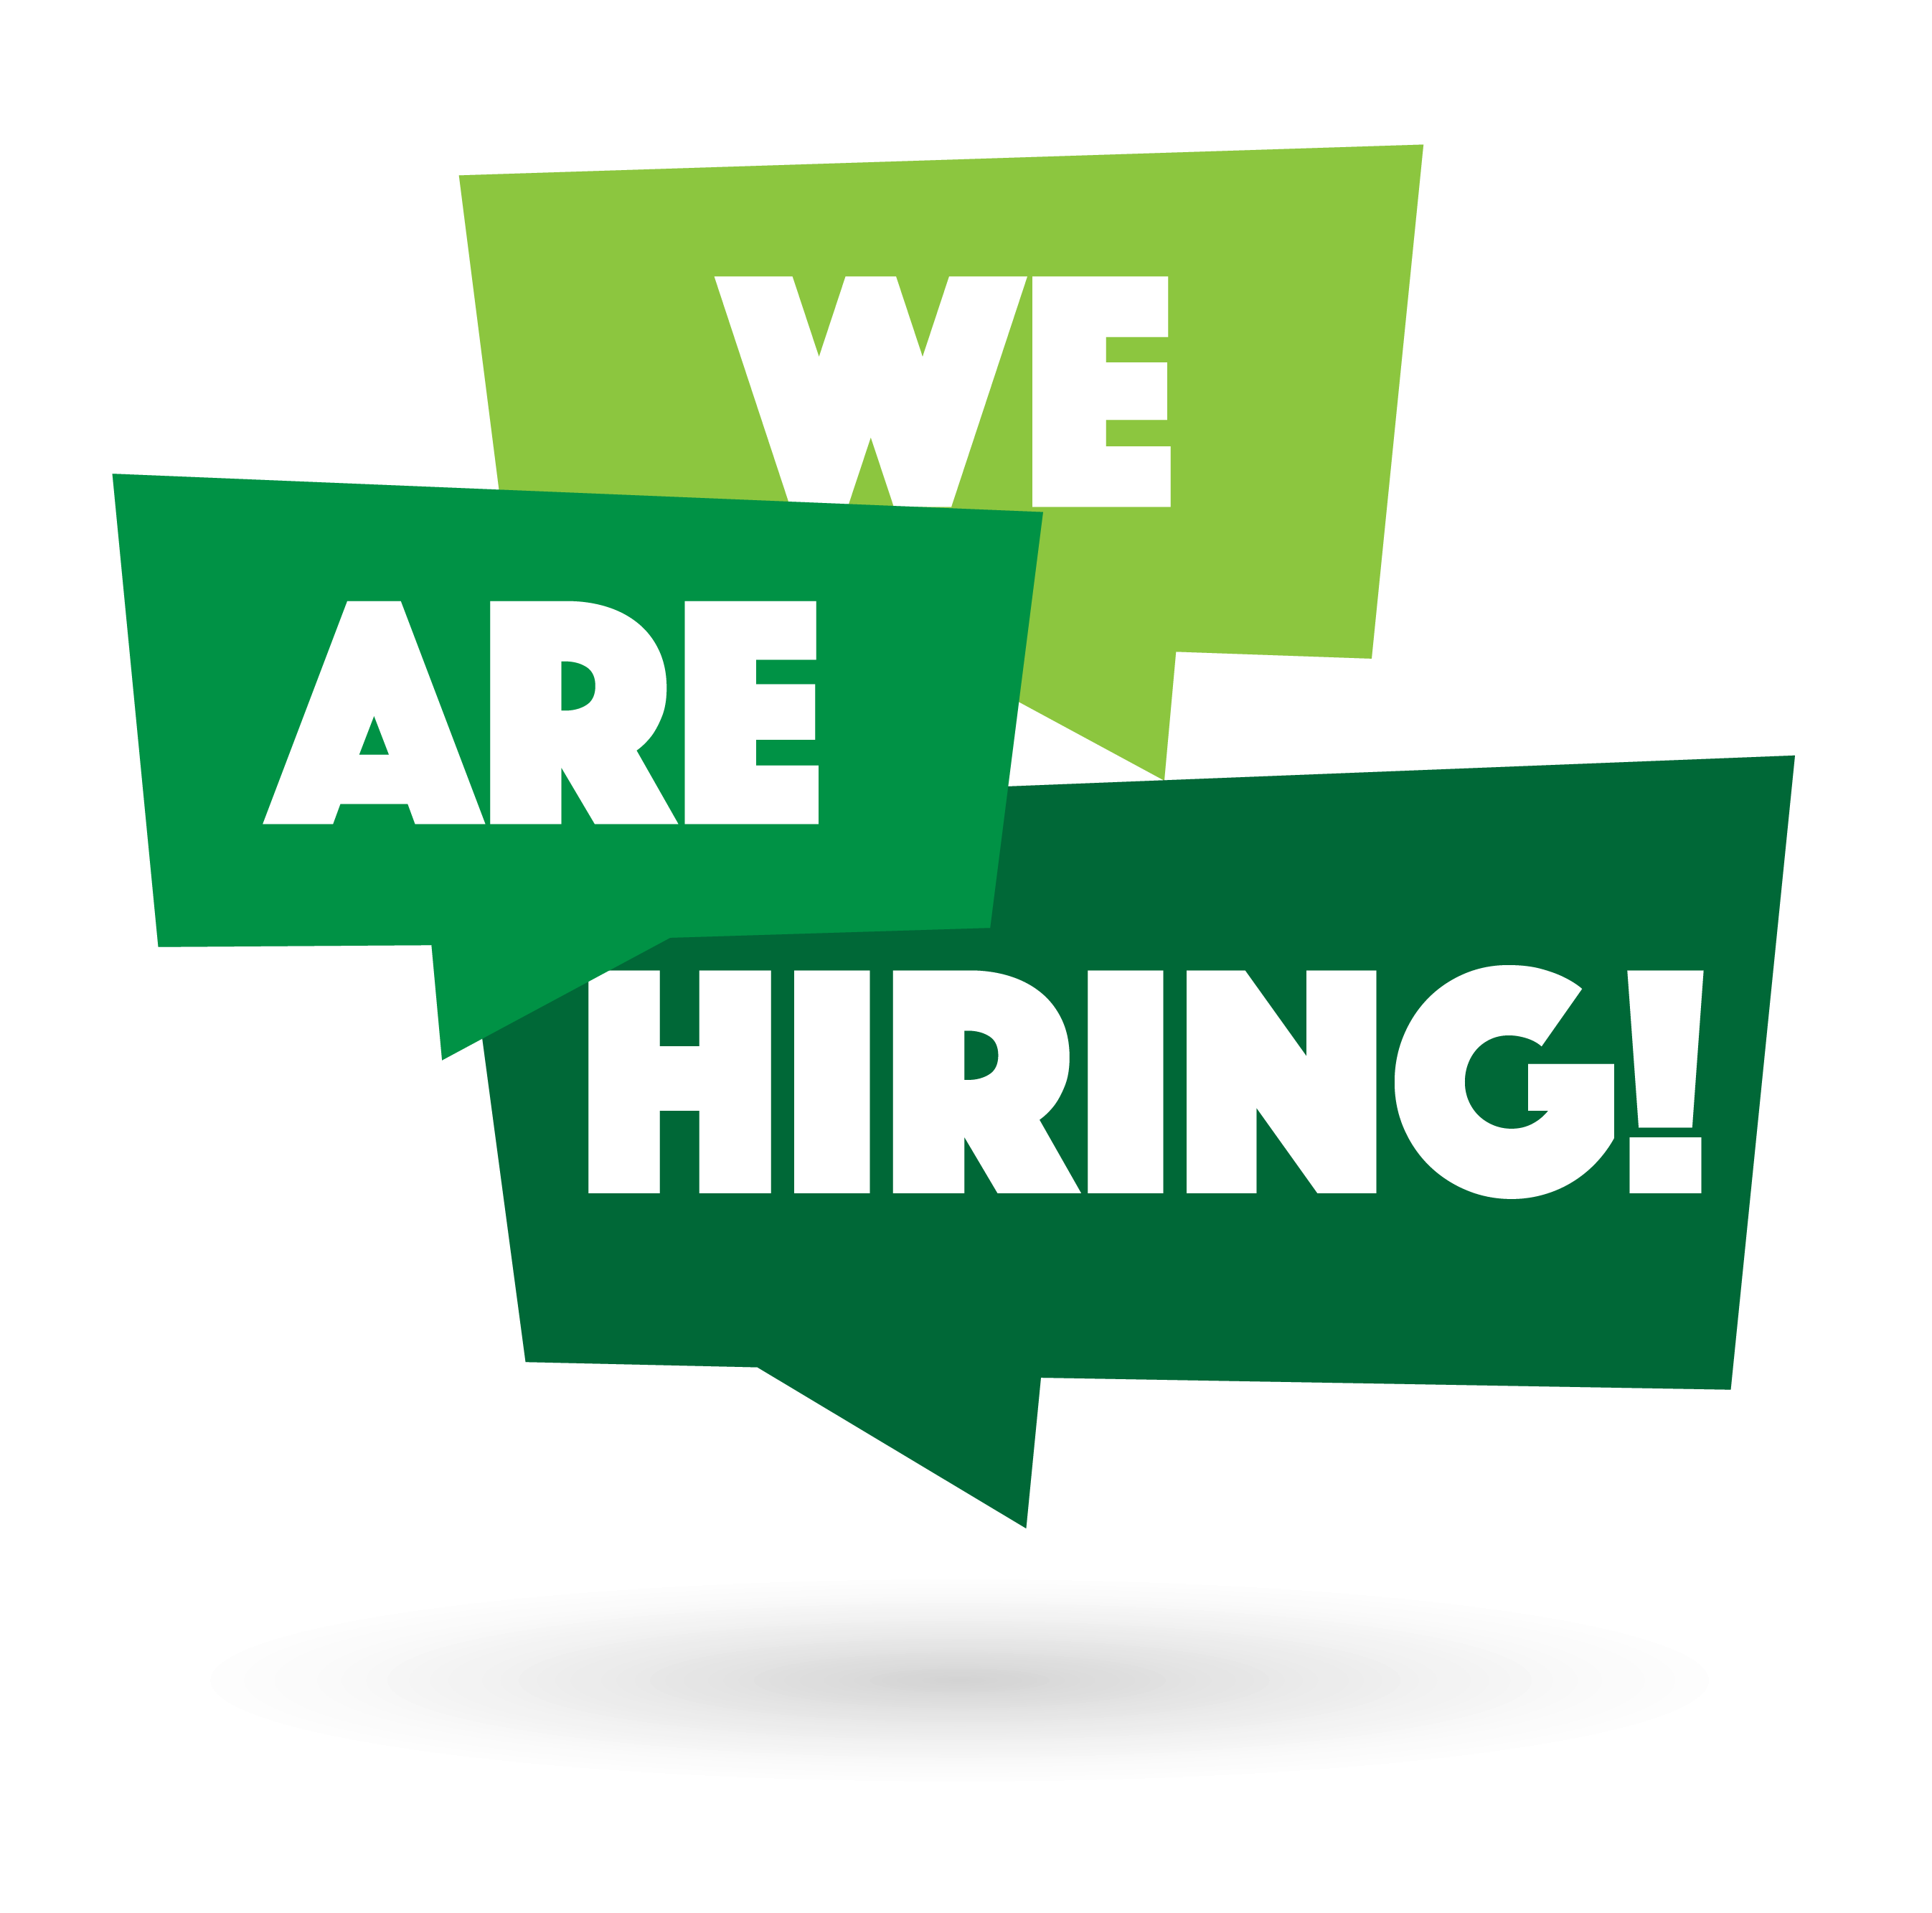 We-Are-Hiring-Graphic-Green-Clear-Background.png